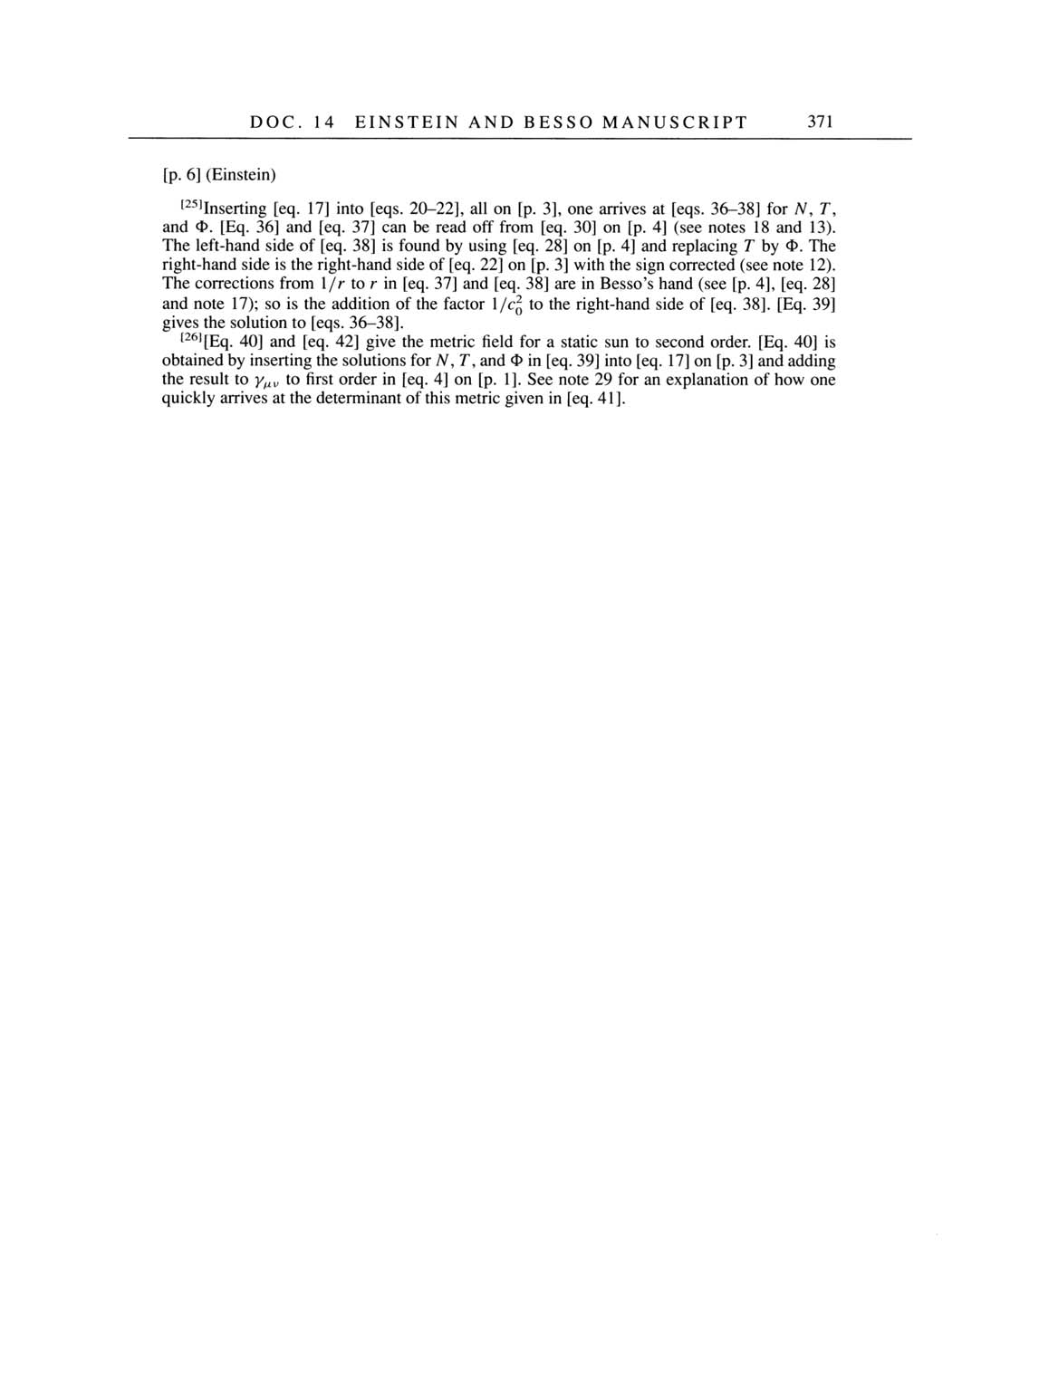 Volume 4: The Swiss Years: Writings 1912-1914 page 371